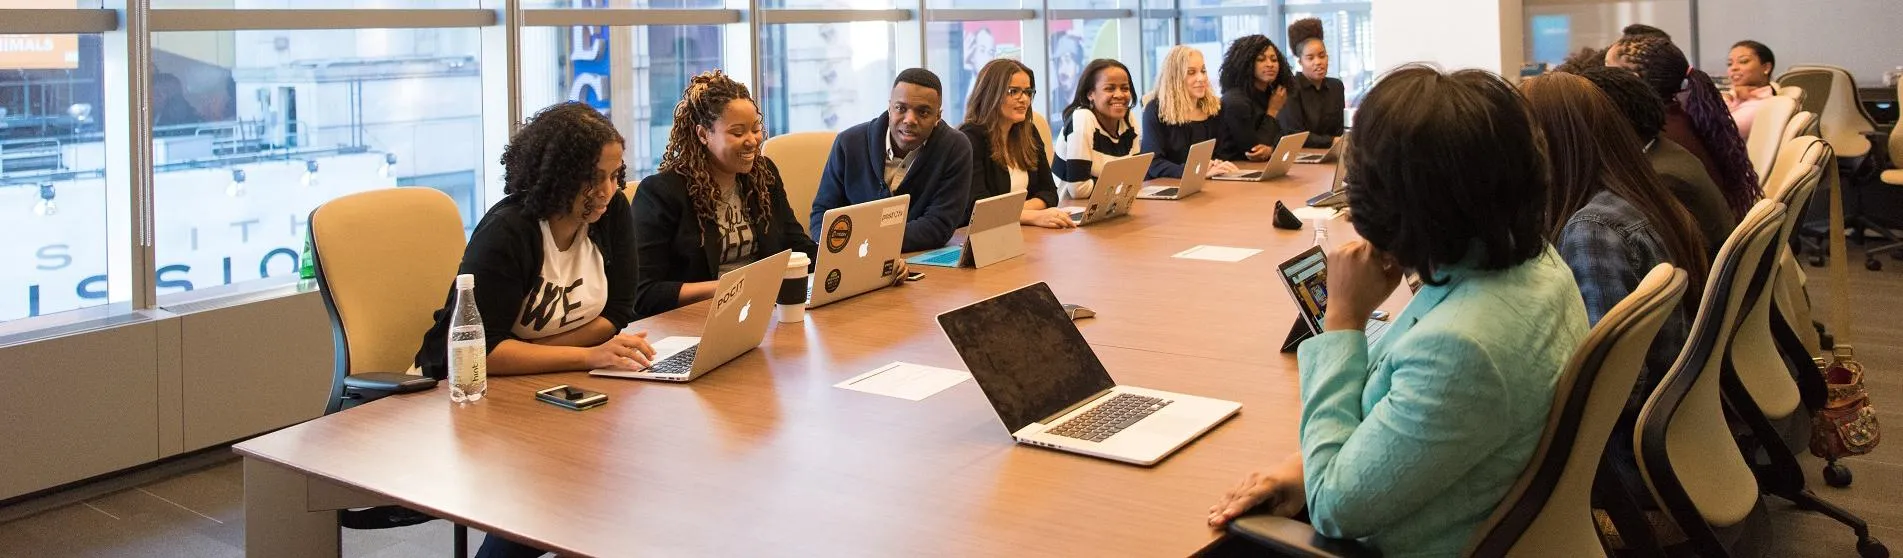 A diverse group of women and men around a boardroom table